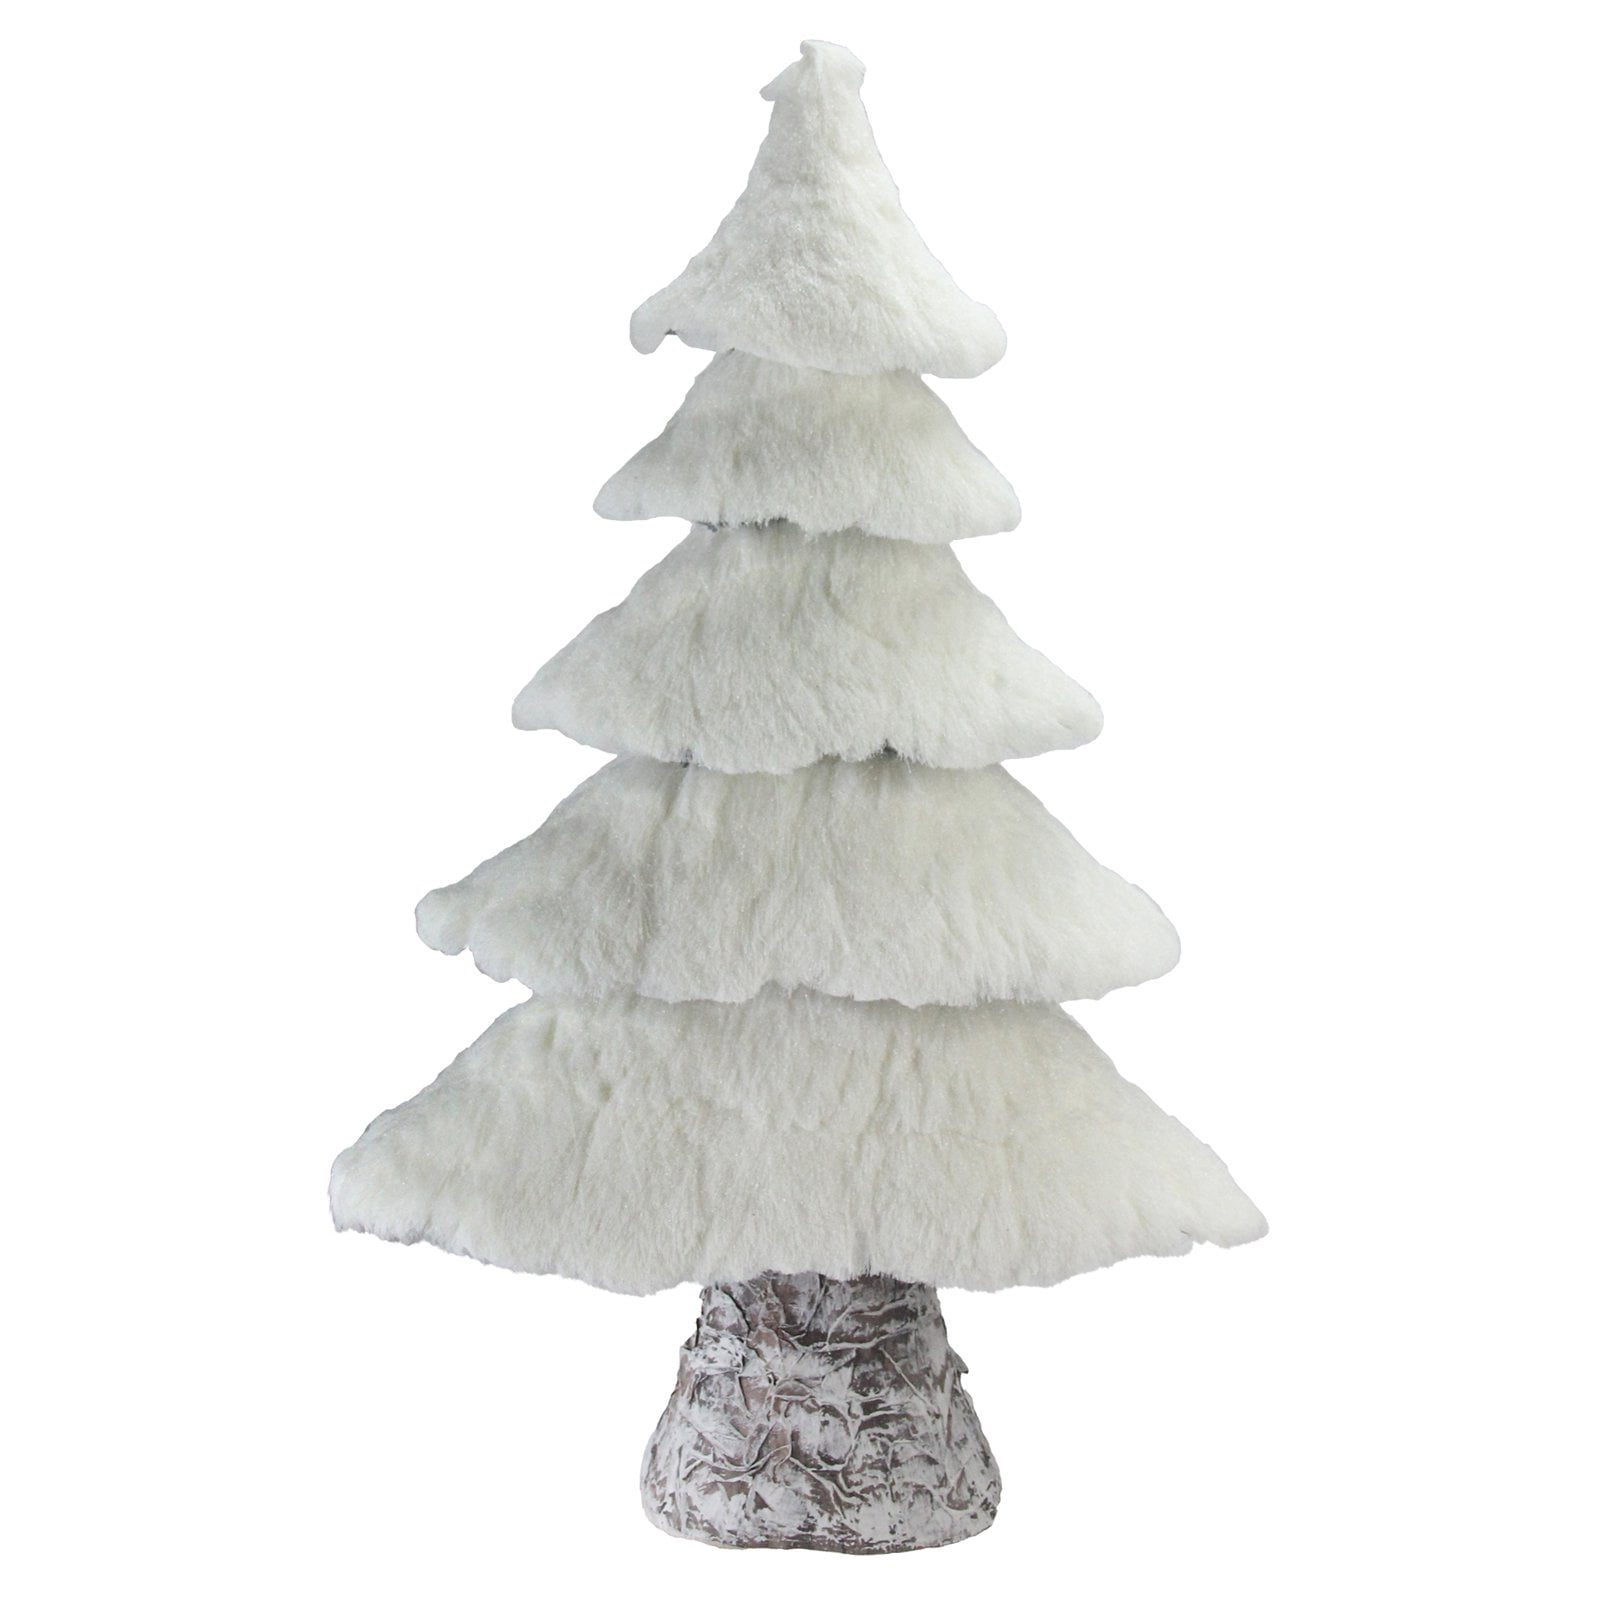 Northlight Rustic Birch Wood Tree with Faux Snow Canopy Tabletop ...